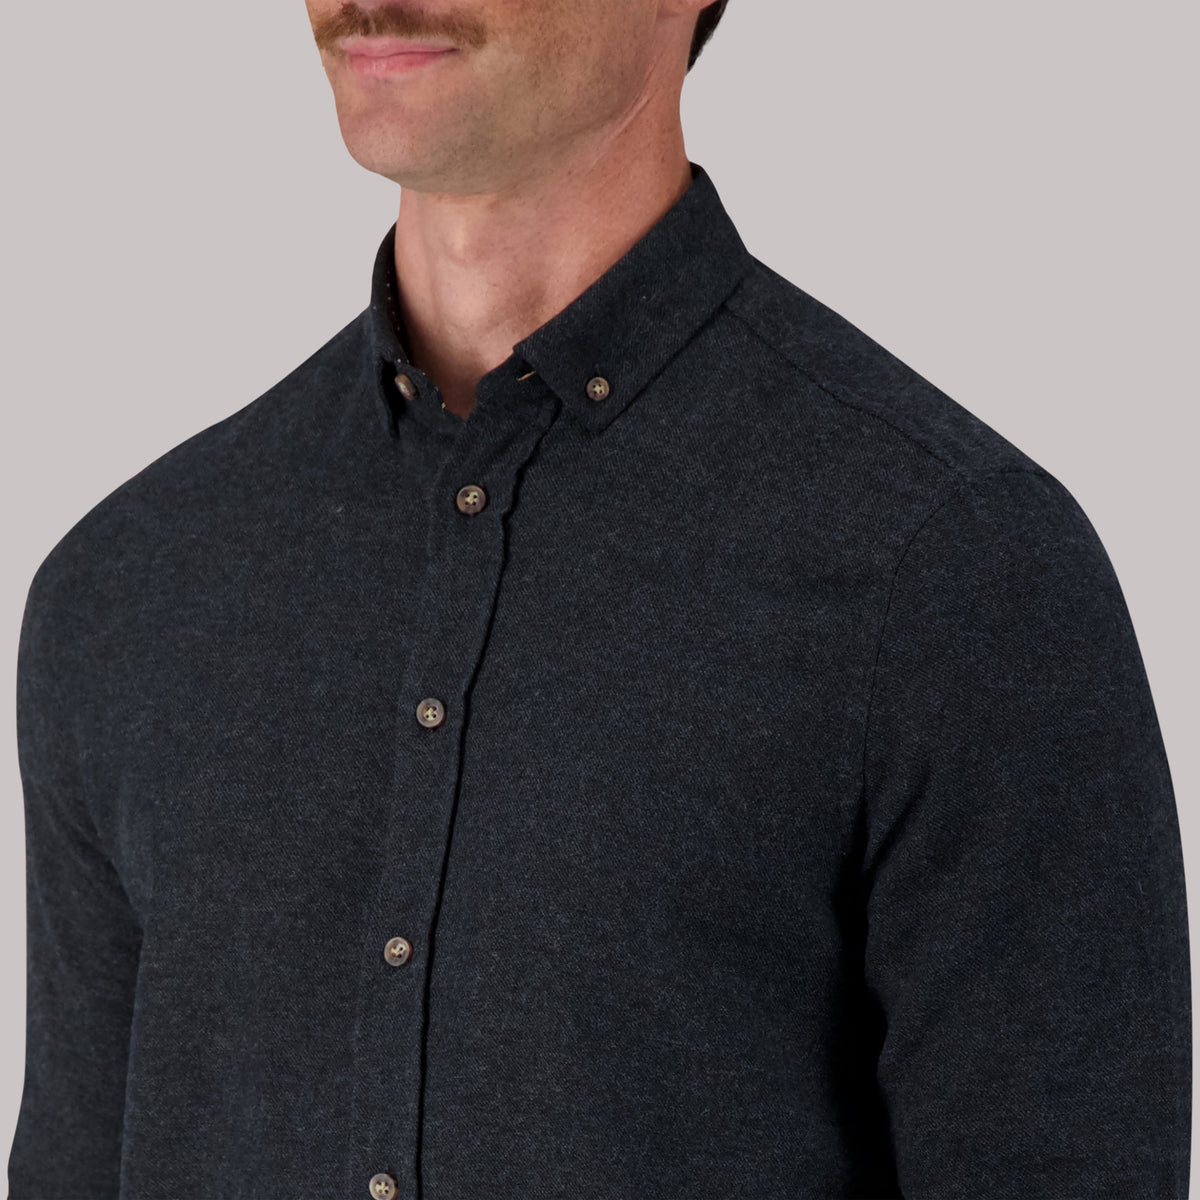 Long Sleeve Cotton Flannel Melange Woven Sport Shirt in Charcoal